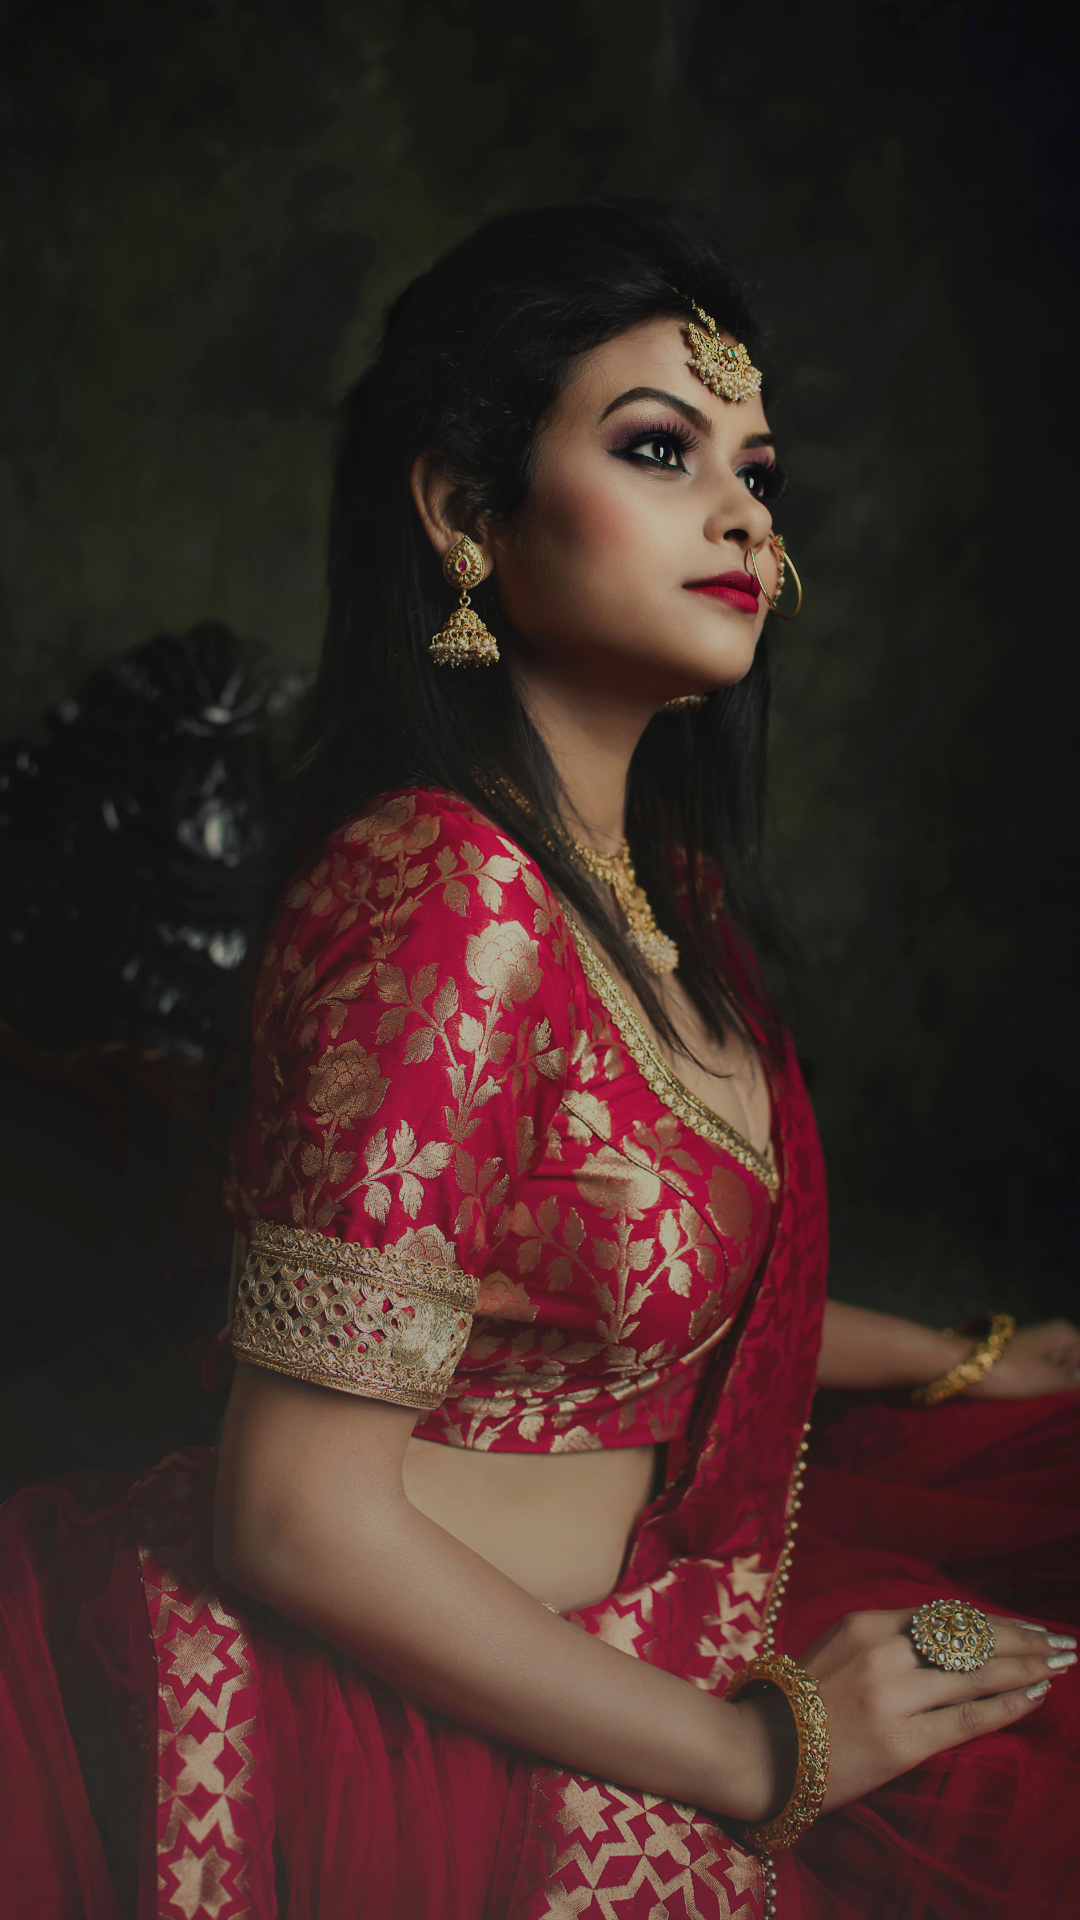 7 Mistakes to Avoid While Getting a Lehenga or Saree Blouse